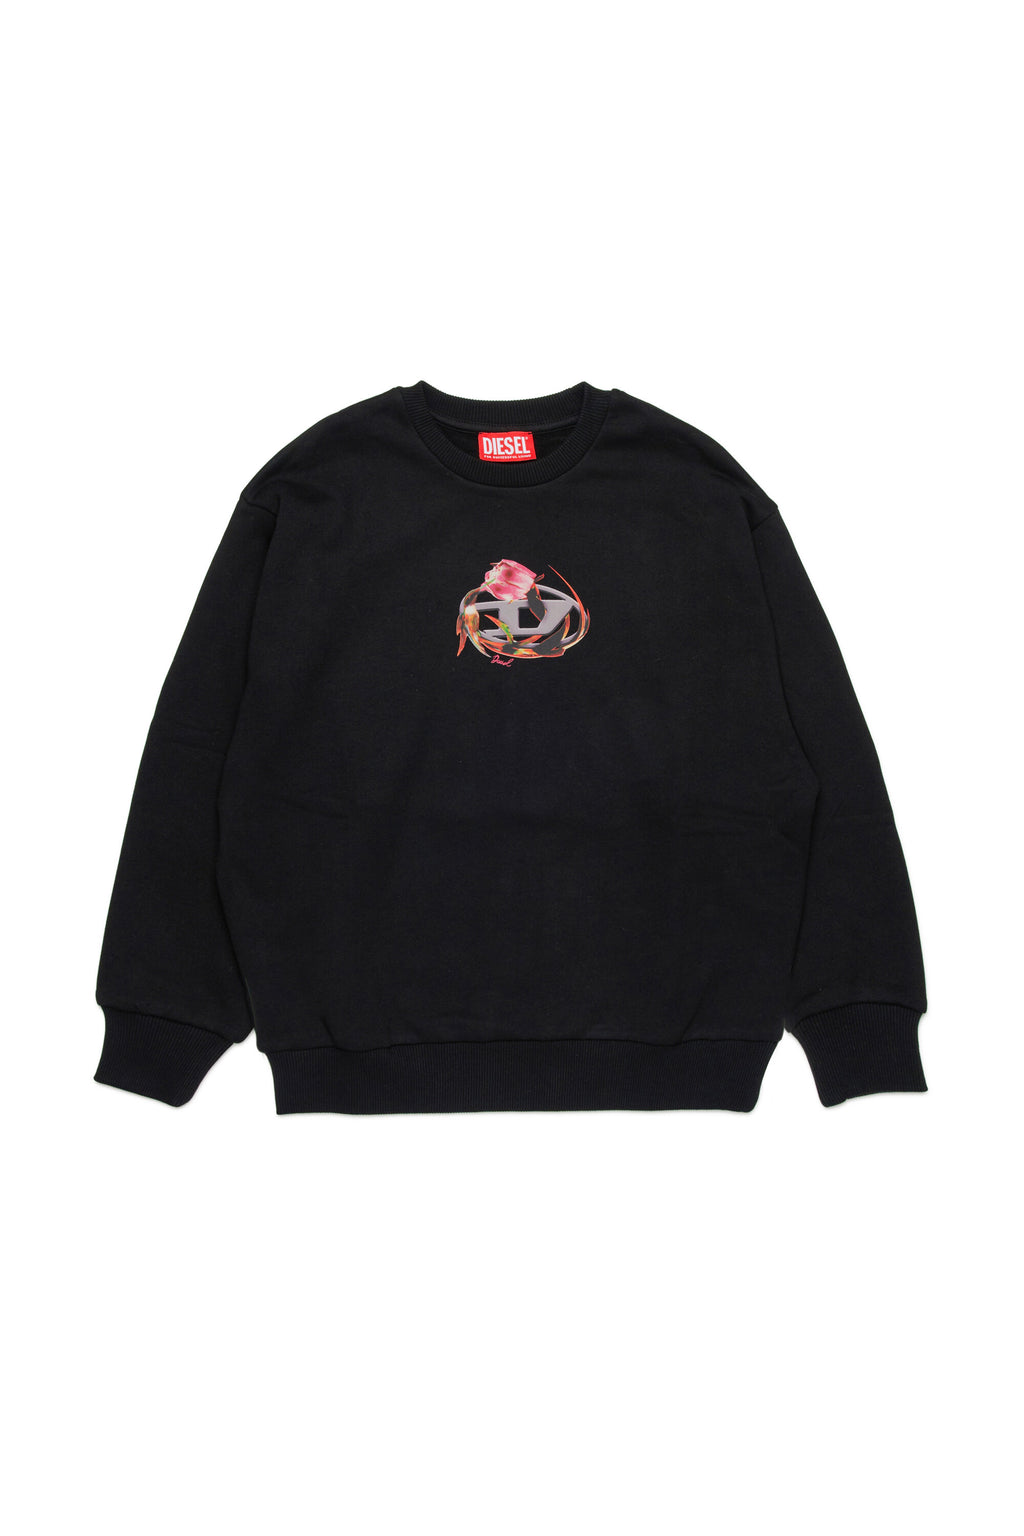 Crew-neck sweatshirt with oval D floral graphic